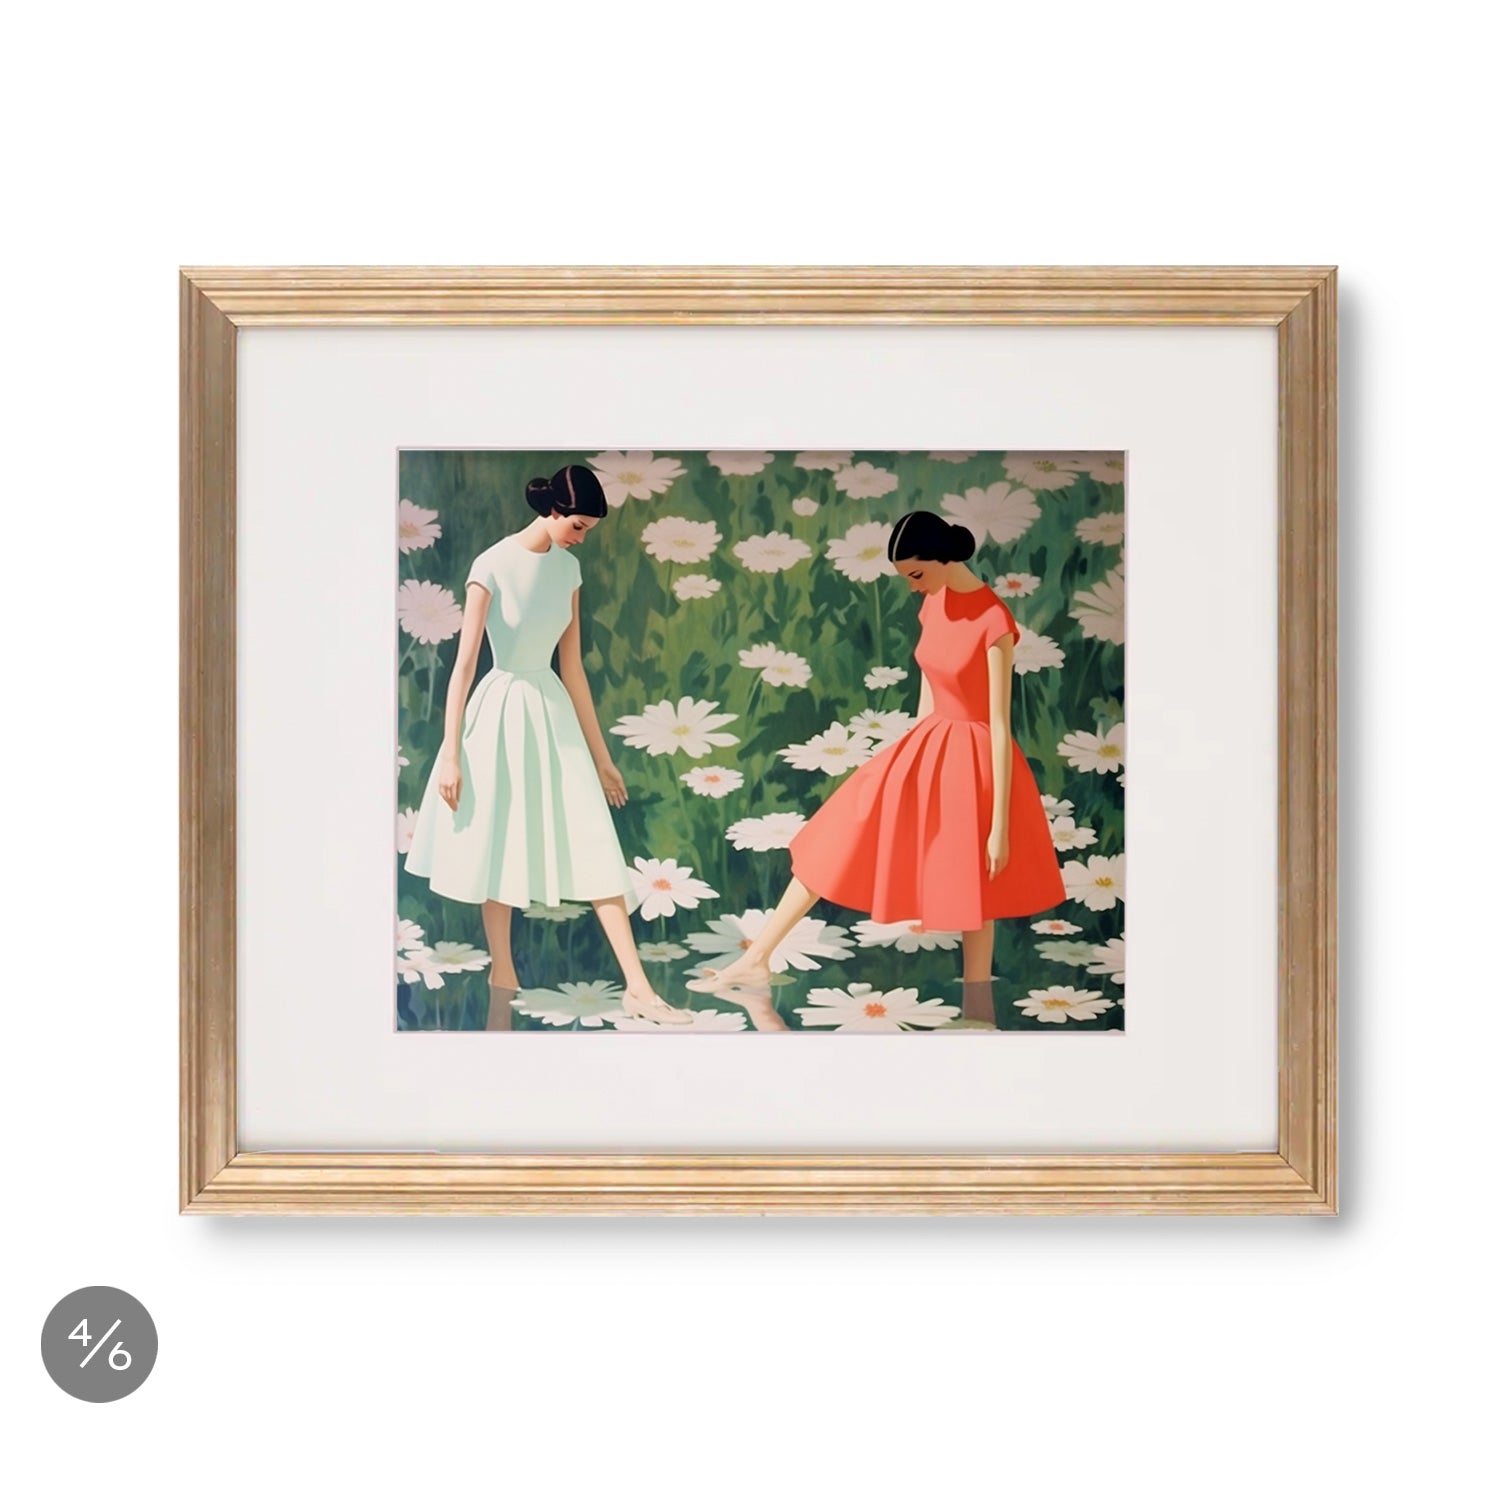 Two women in dresses walking through a field of daisies. The enchanting scene captures the essence of natural beauty and serenity, making Gallery Wall | Sweet Tart | 6 Piece Set by Stannie & Lloyd a perfect choice for art enthusiasts looking to create.